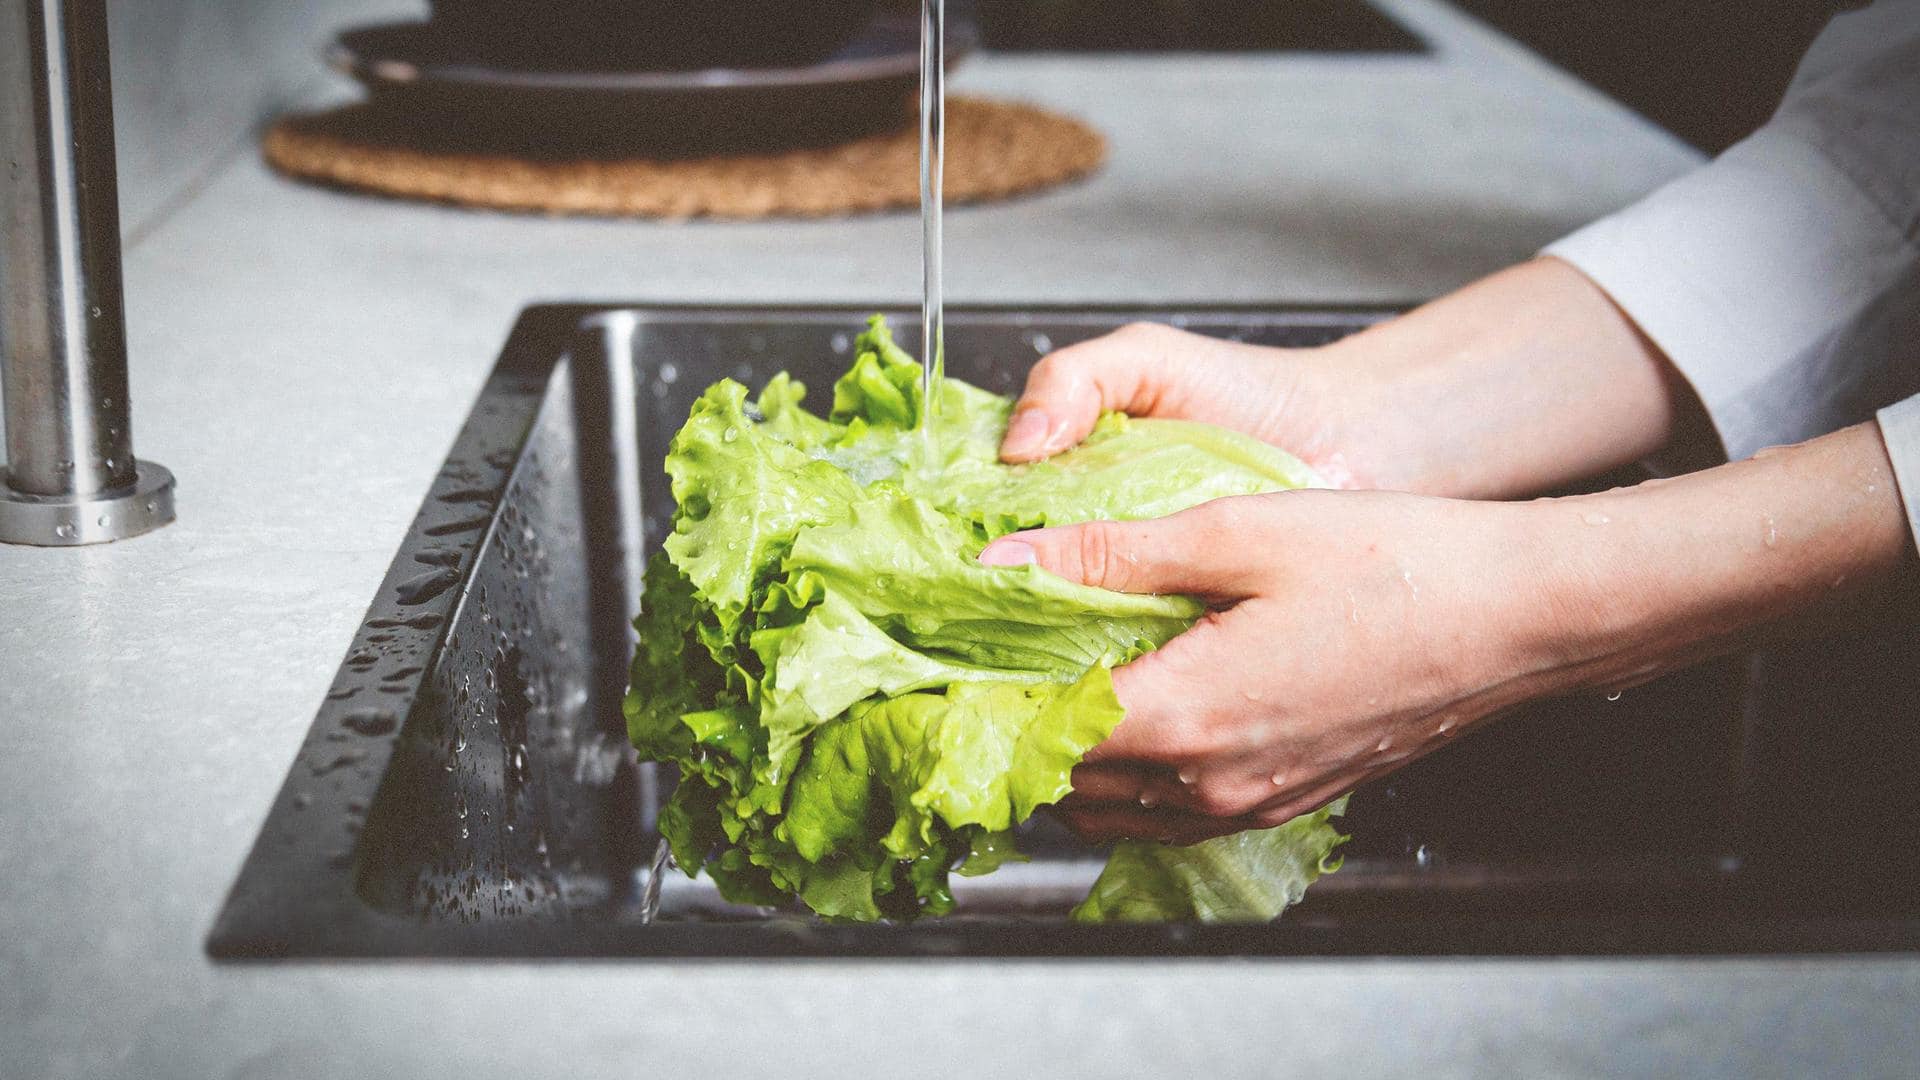 Here's how you can wash veggies the right way